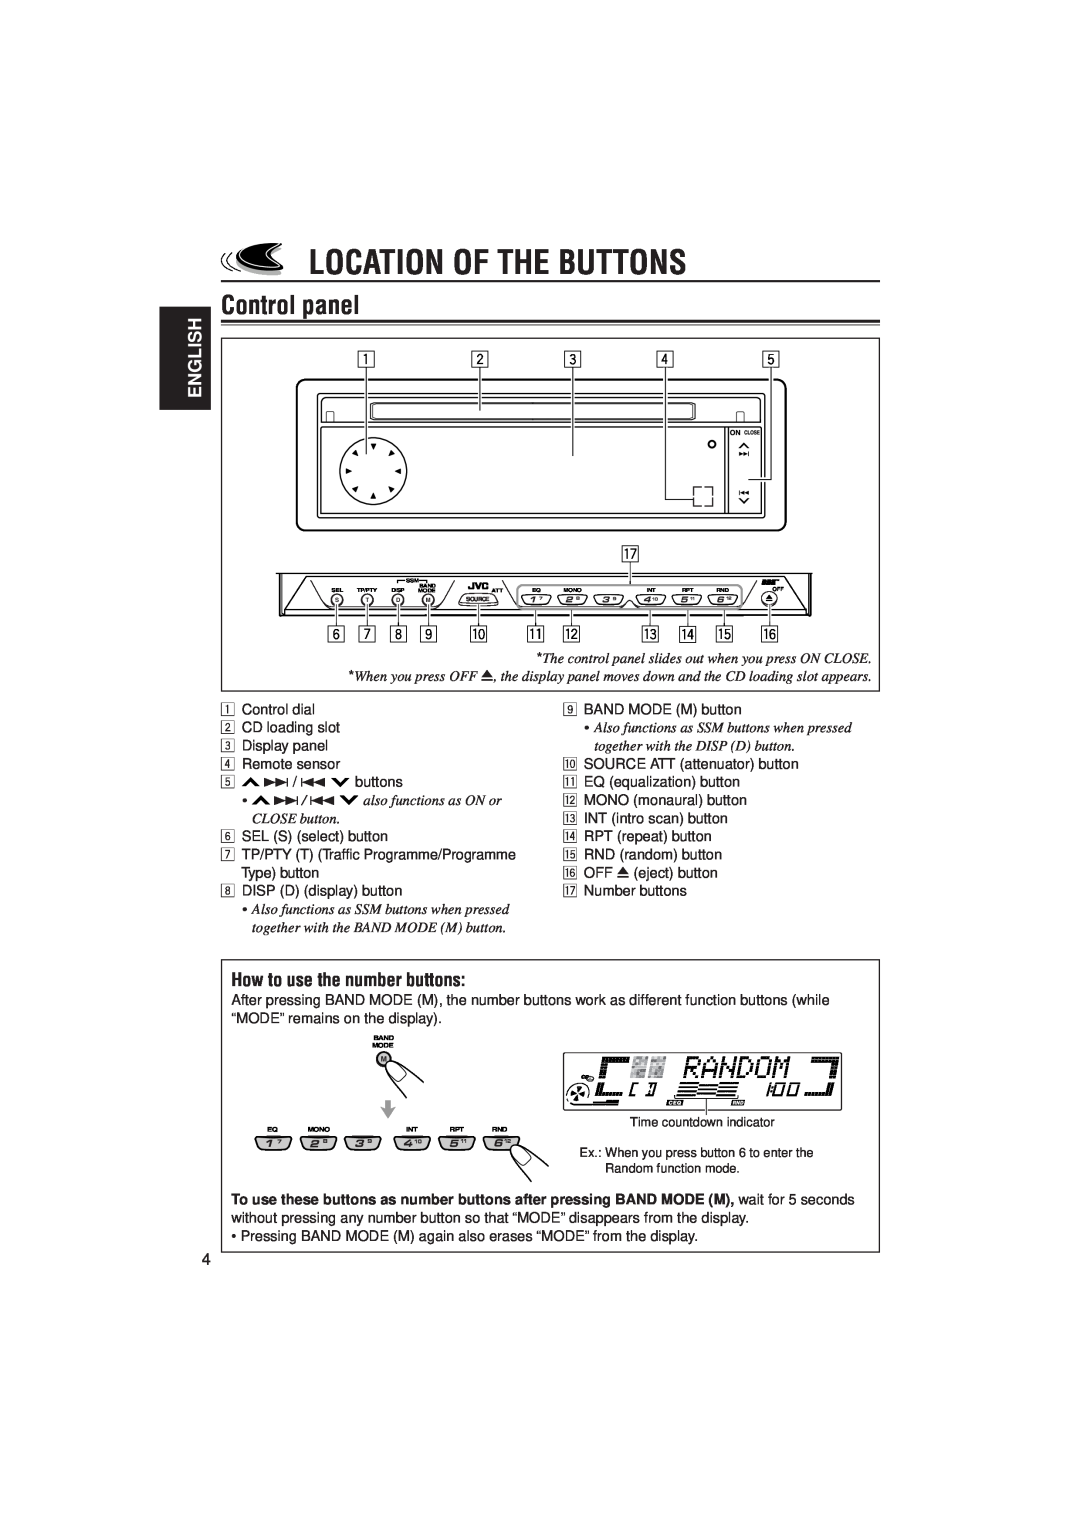 JVC PIM171200 manual Location Of The Buttons, Control panel, English, How to use the number buttons 